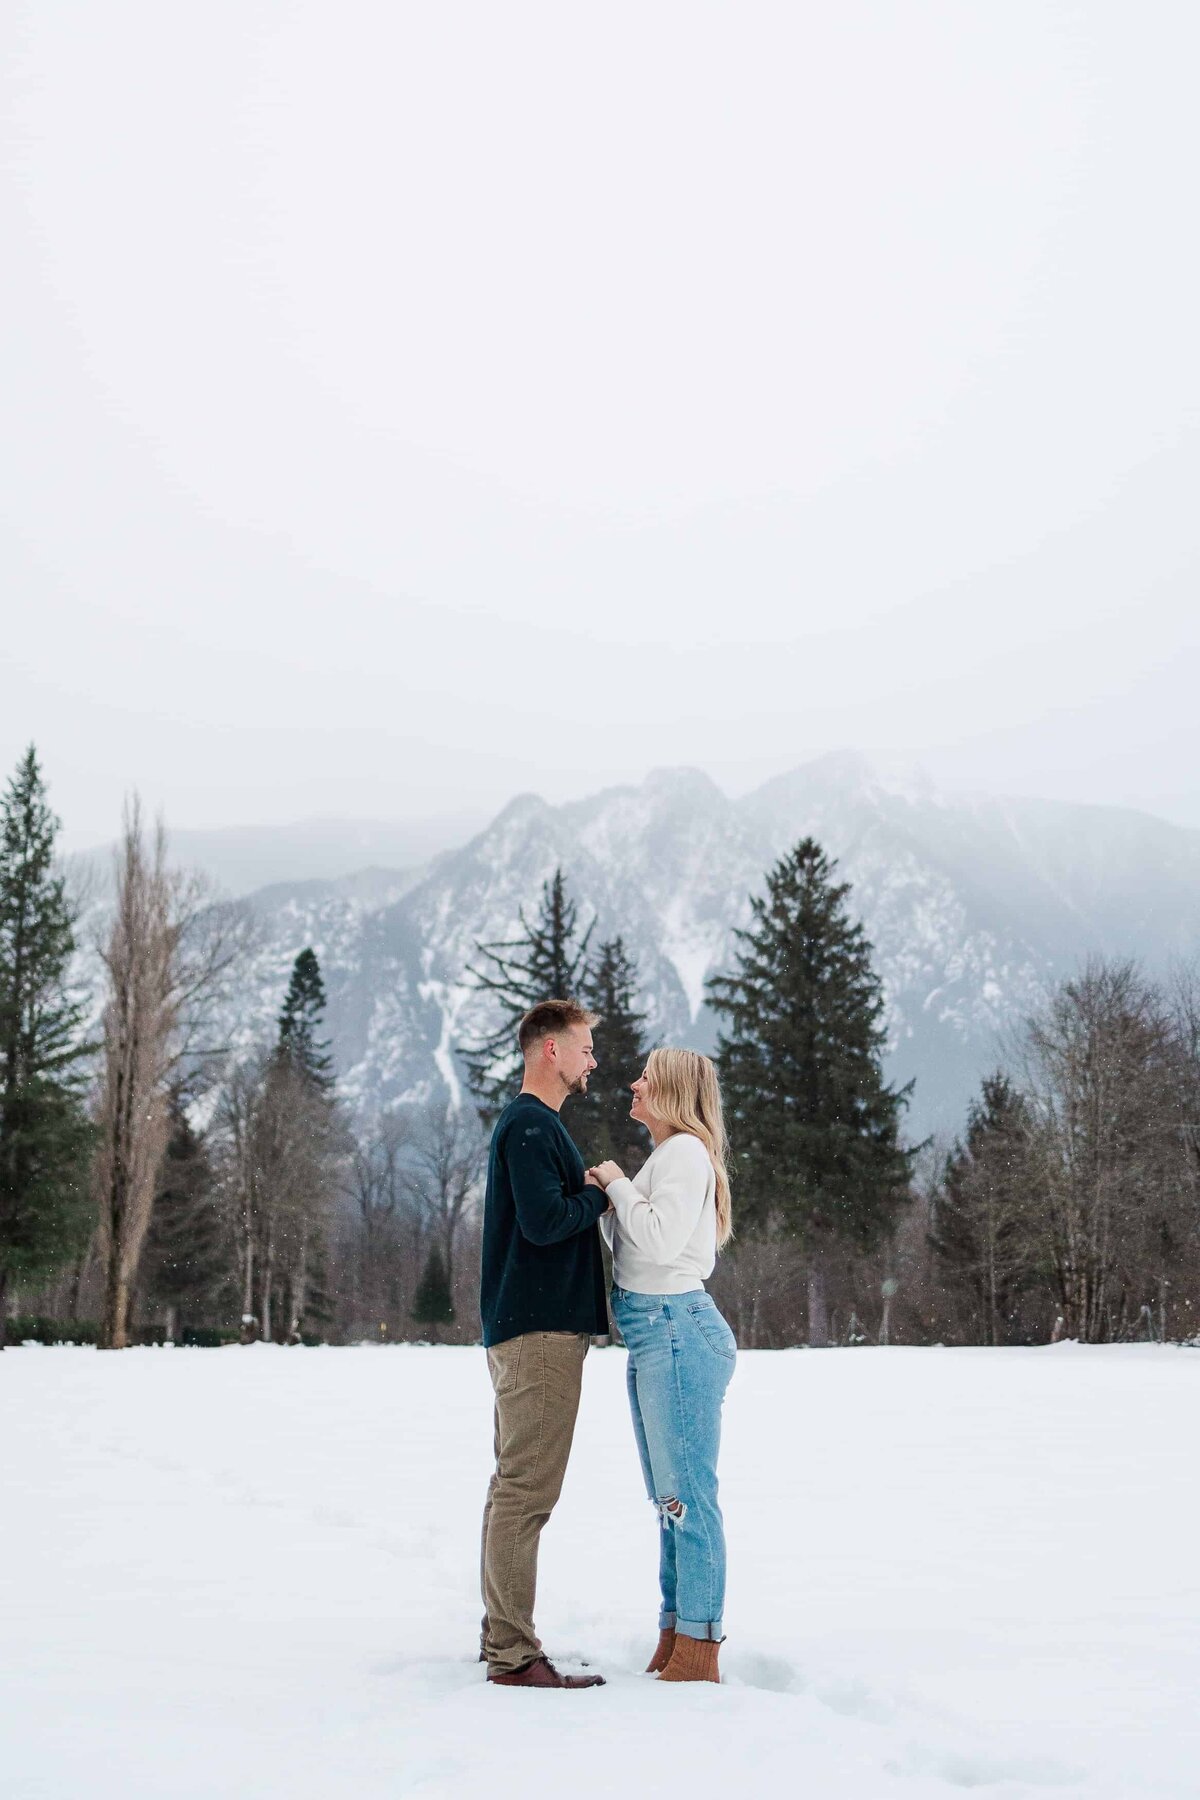 Snowy-Engagement-Meadowbrook-Farm-Northbend-WA-21221